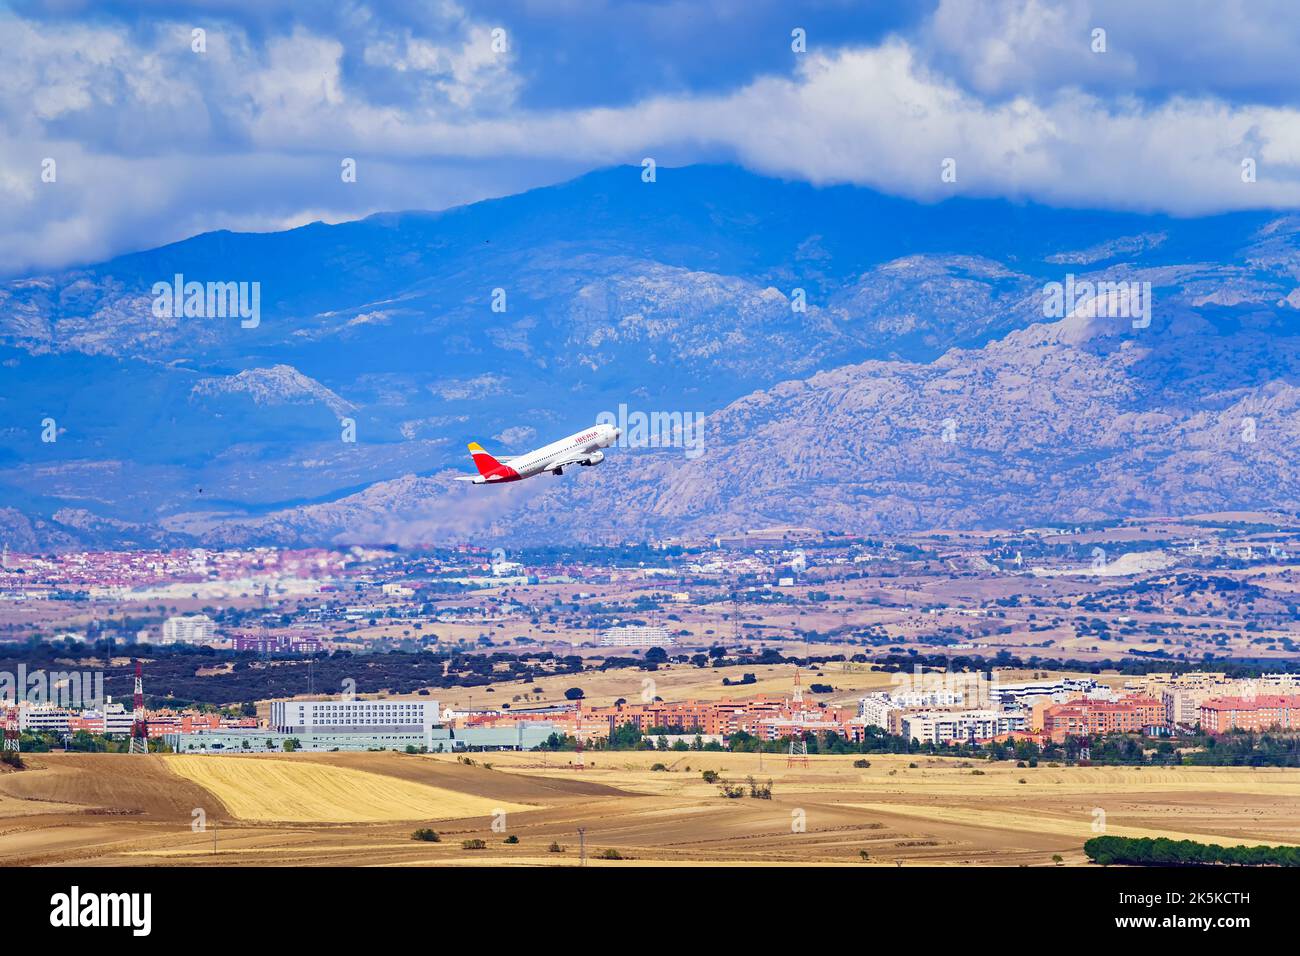 Madrid, Spain, October 30, 2022: Aircraft of the Iberia airline taking off next to the mountains surrounding Madrid. Stock Photo